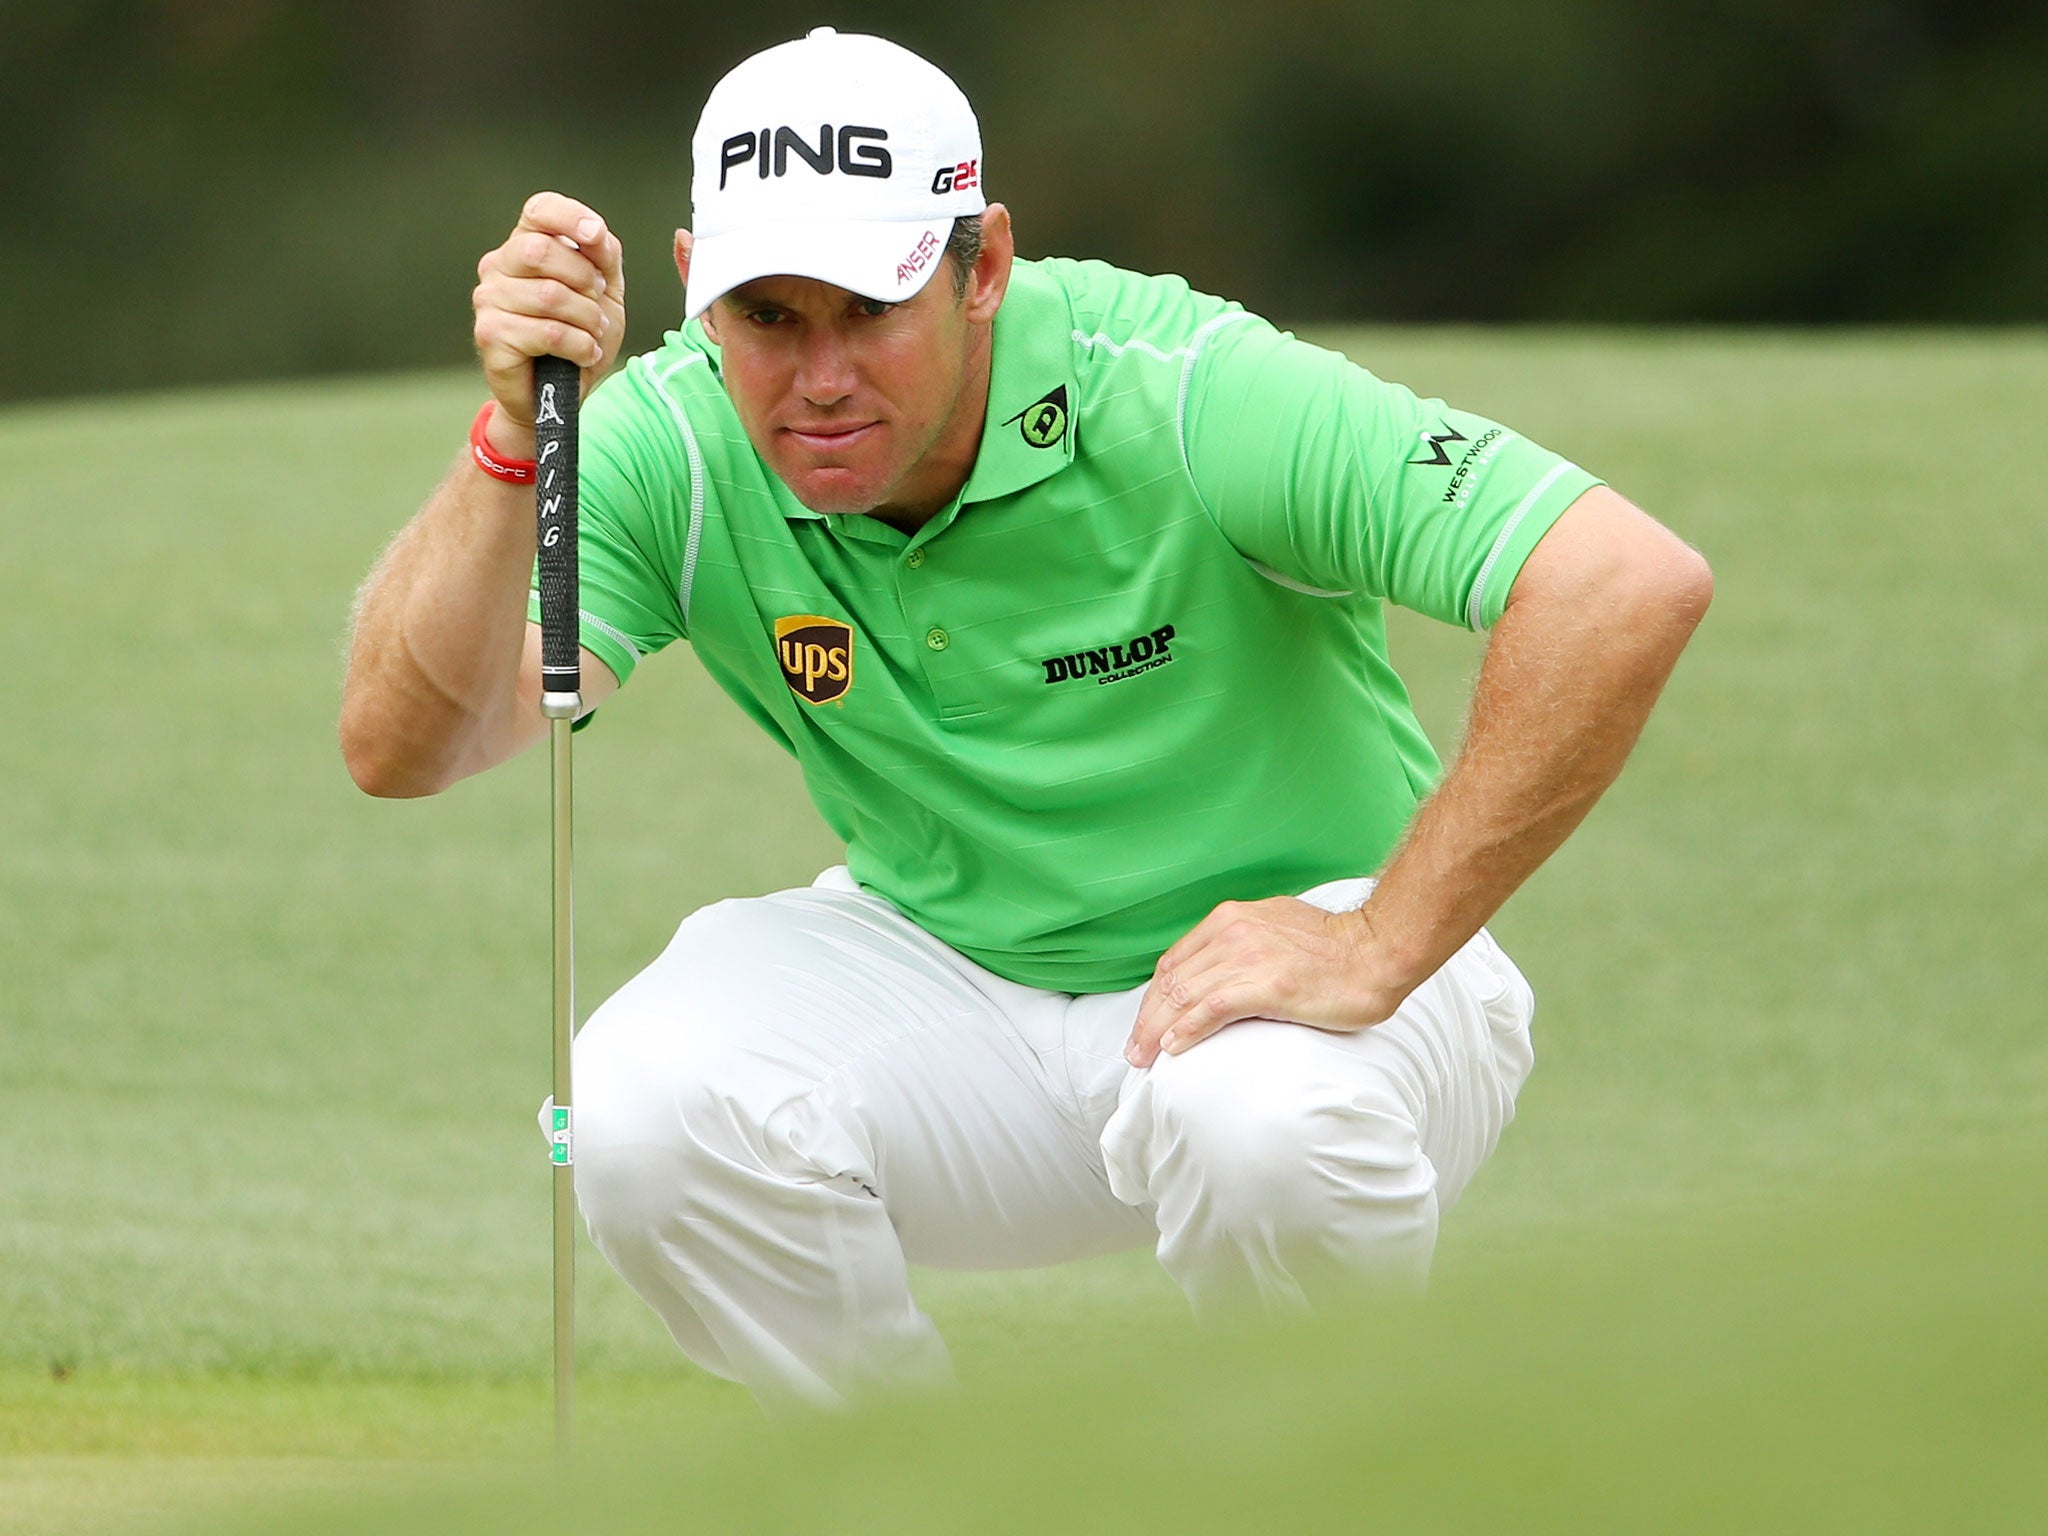 Lee Westwood was saved by his putter on more than one occasion